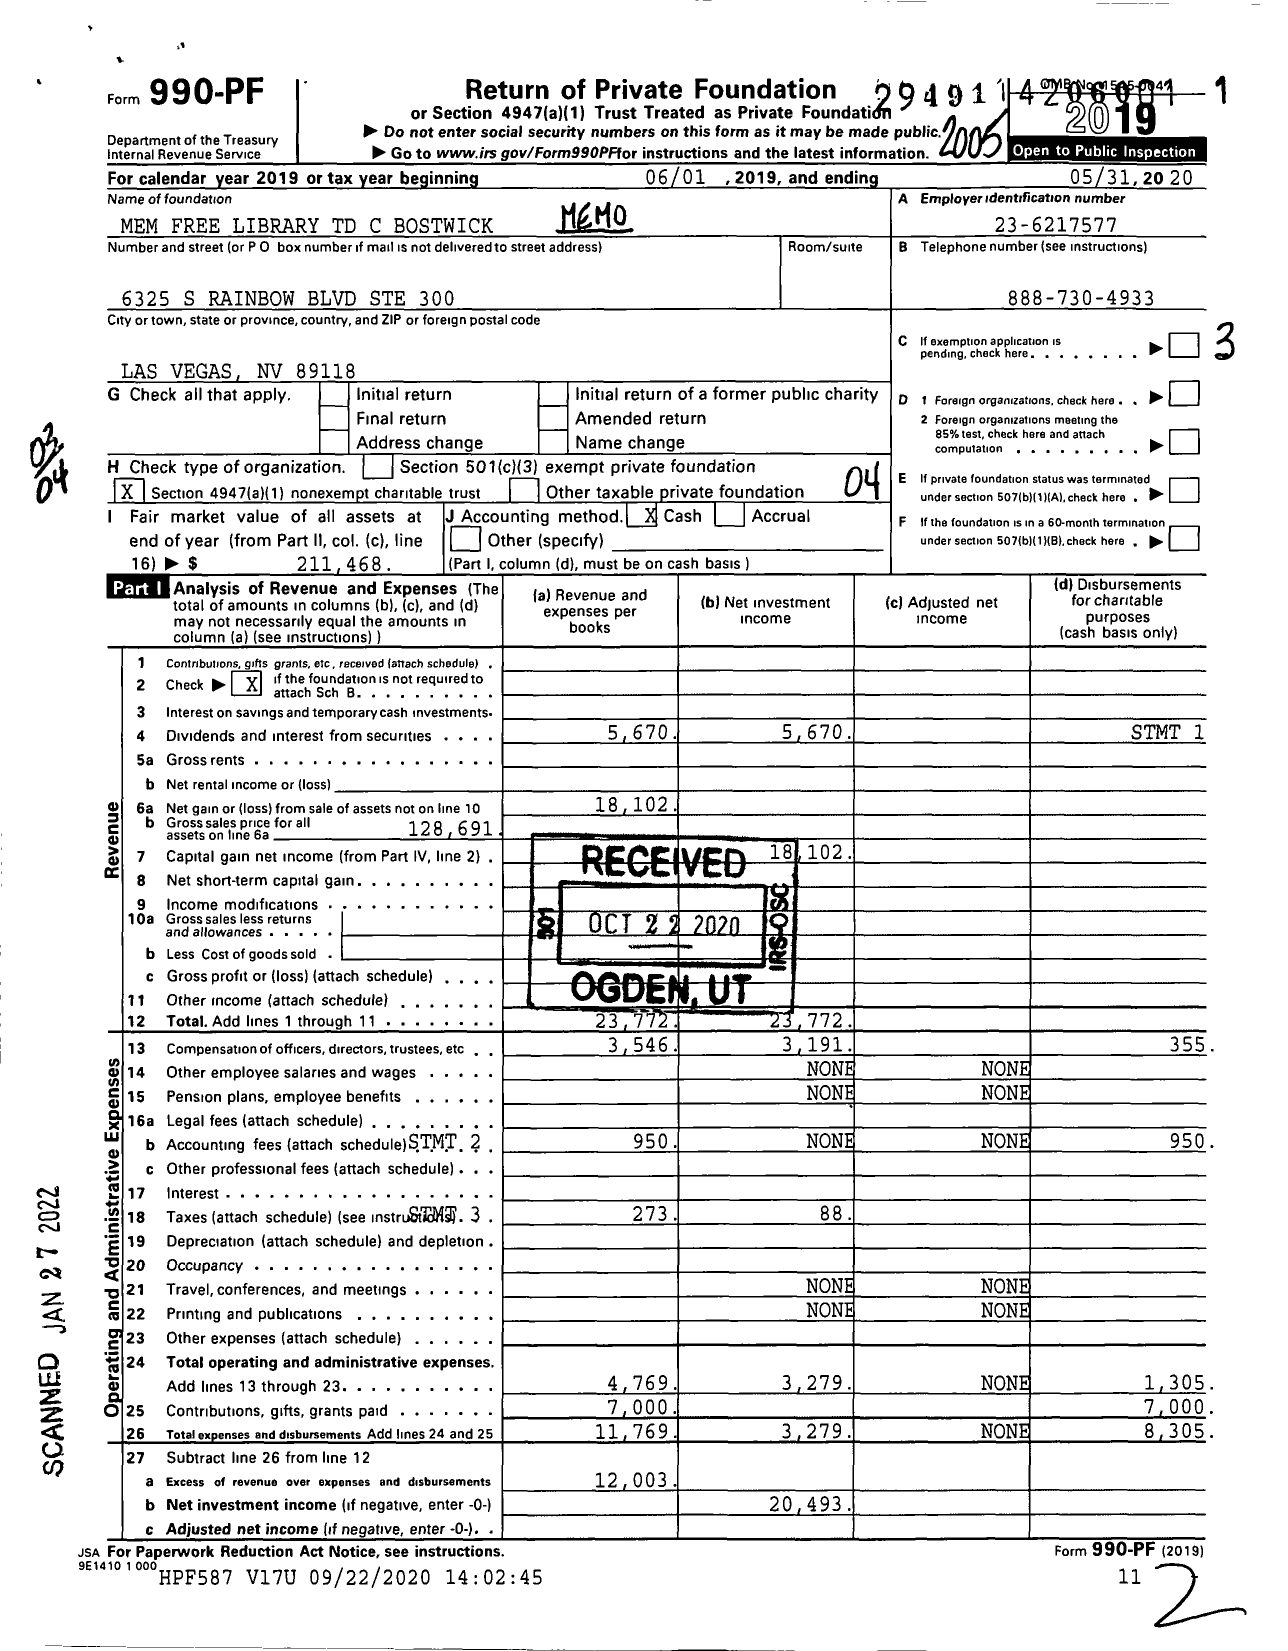 Image of first page of 2019 Form 990PF for Mem Free Library TD C Bostwick